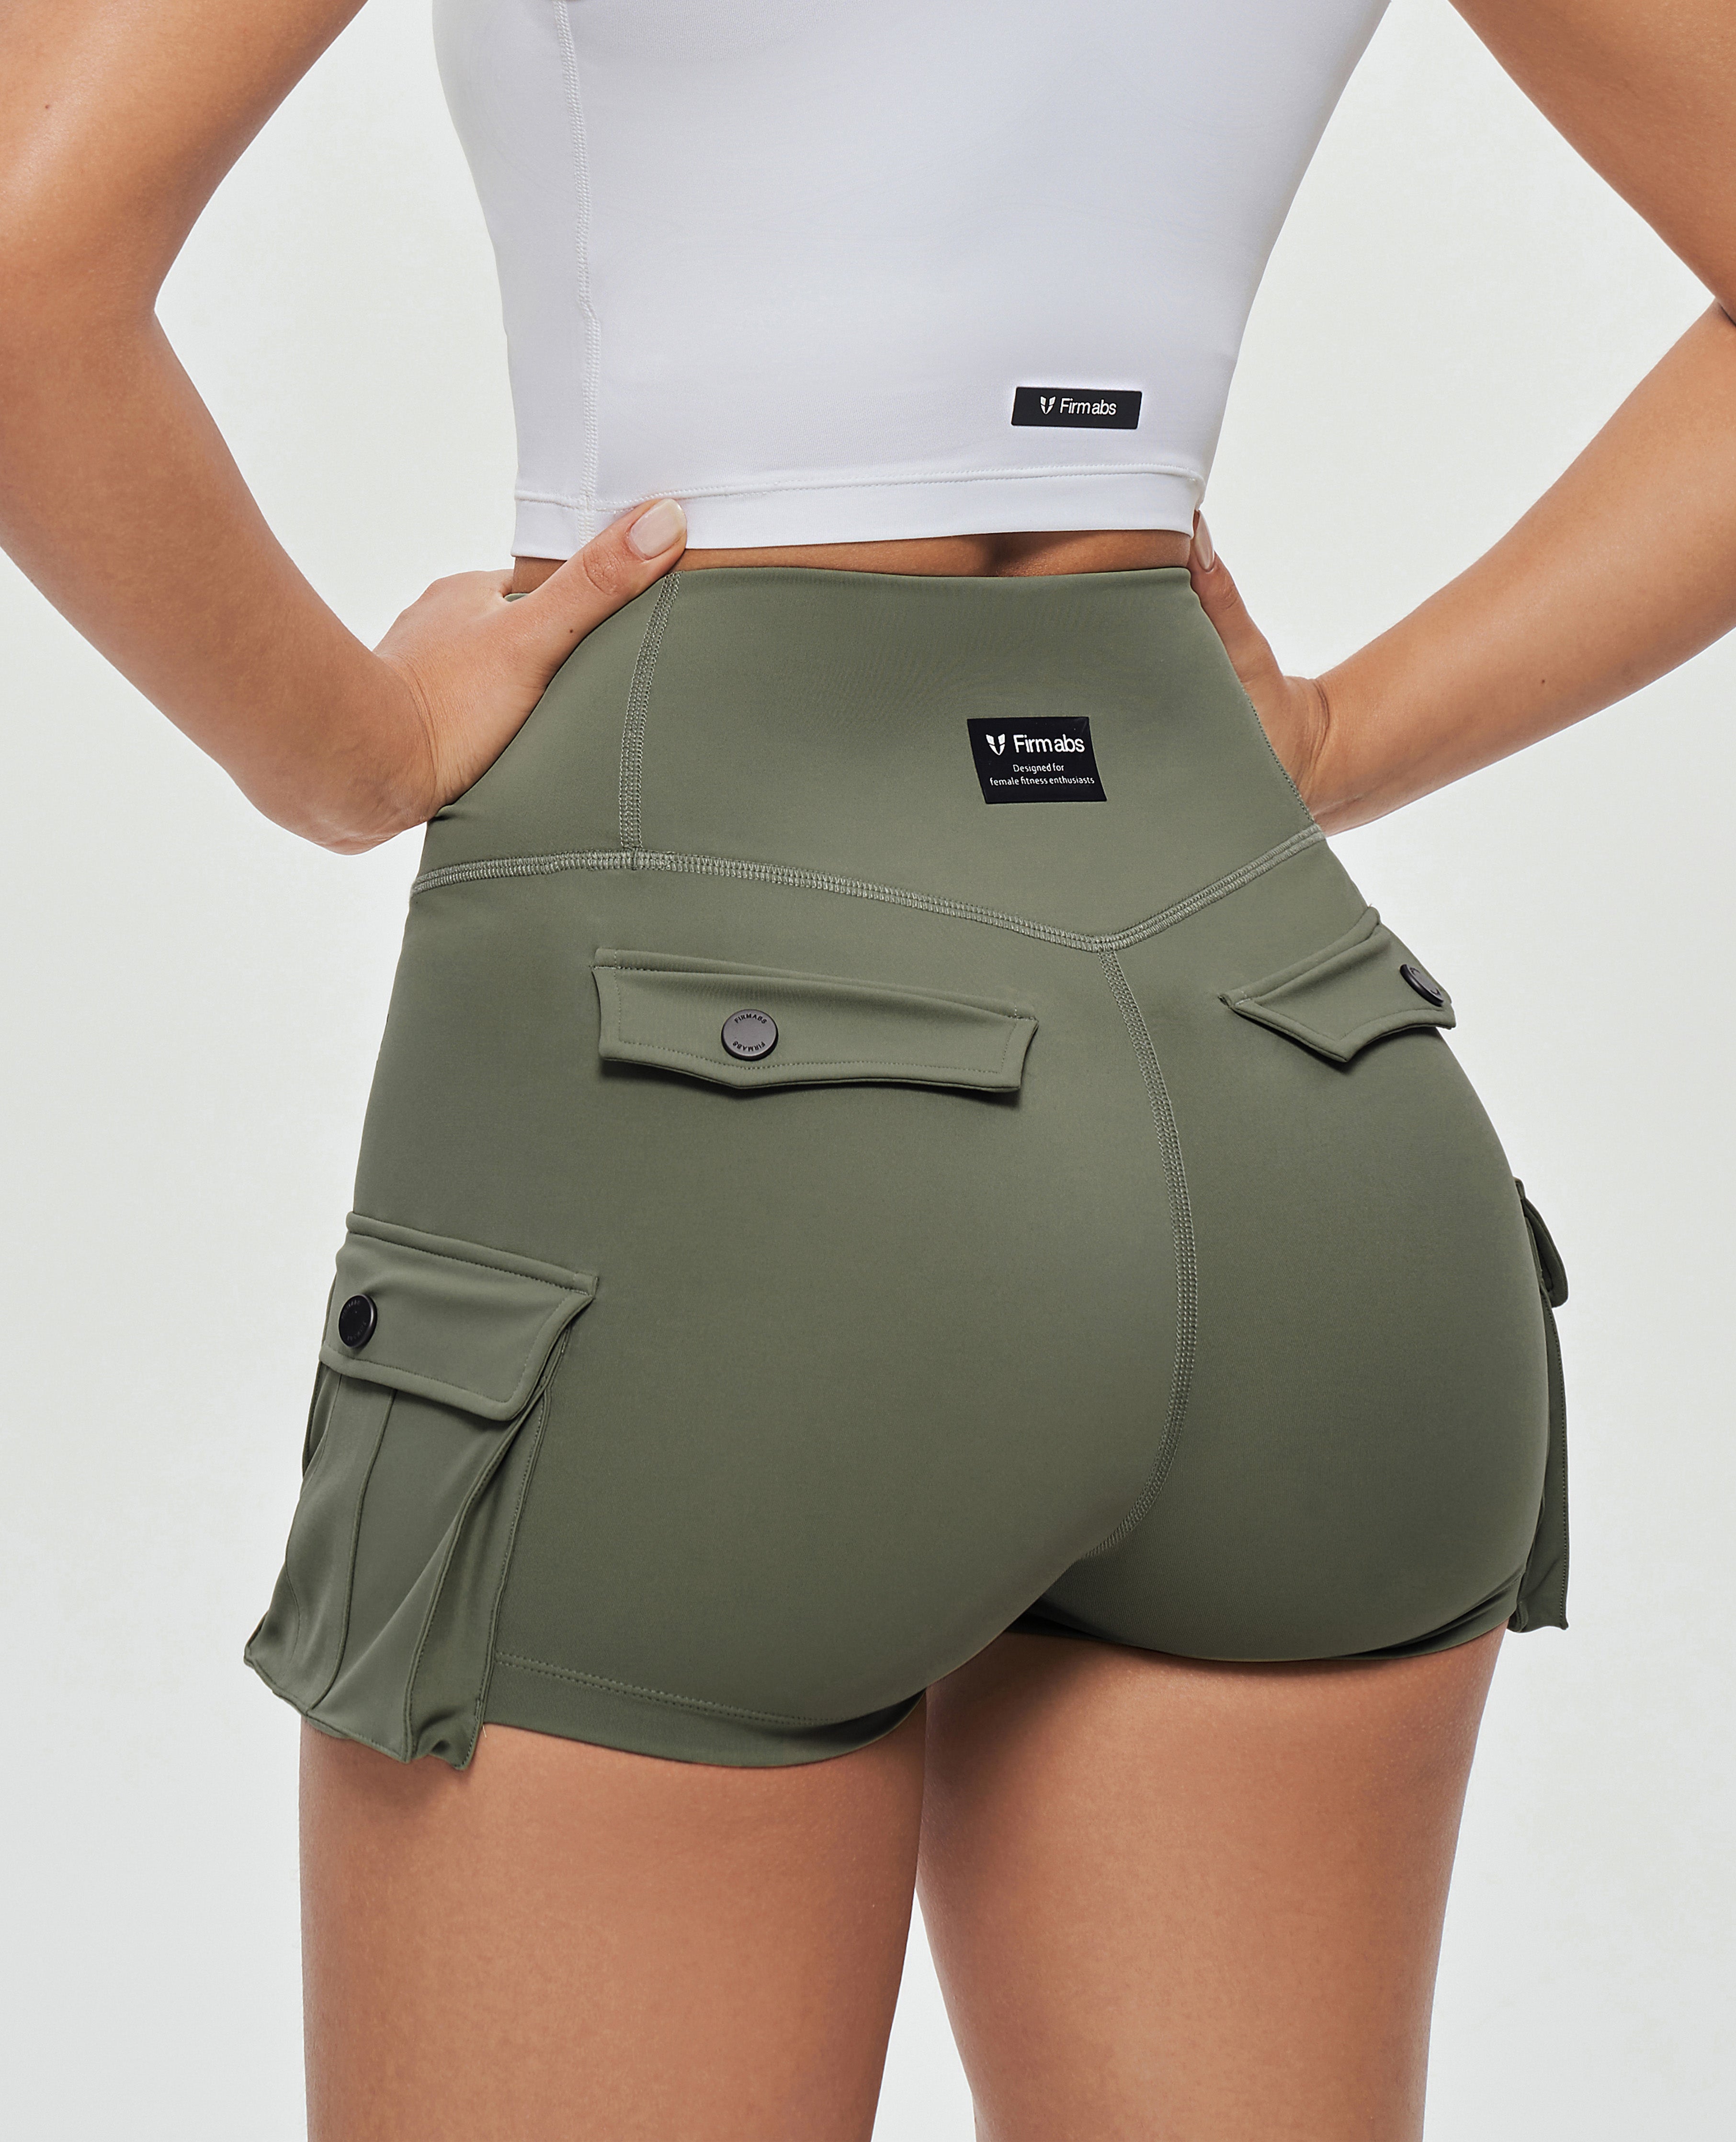 Cargo Shorts for Women with Pockets Scrunch Booty Short Leggings High  Waisted Stretch Workout Athletic Shorts (Medium, Green)